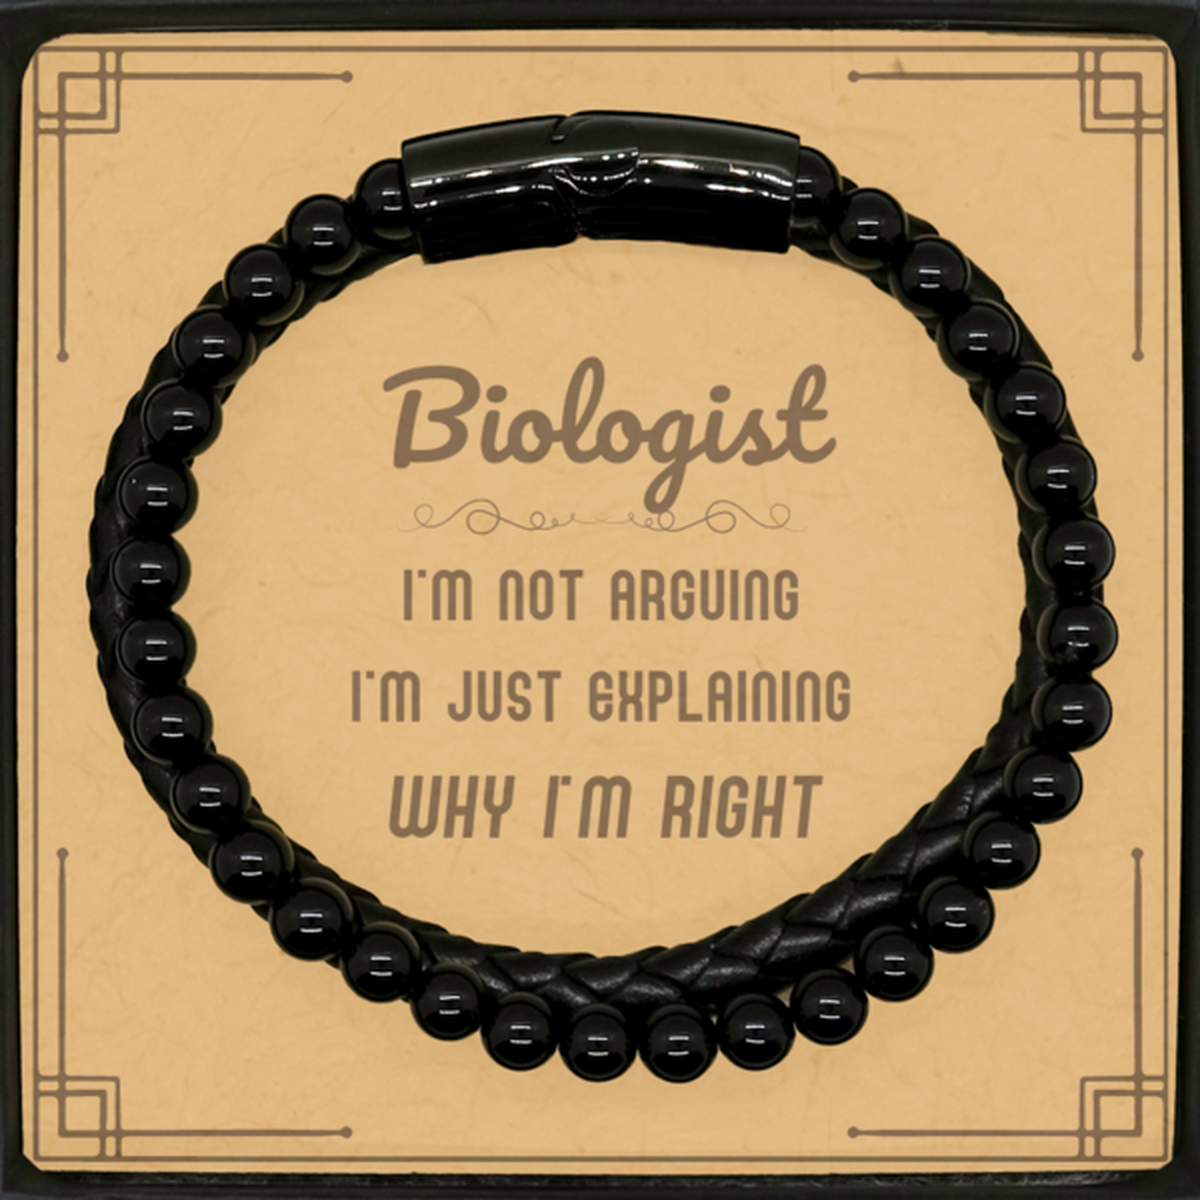 Biologist I'm not Arguing. I'm Just Explaining Why I'm RIGHT Stone Leather Bracelets, Funny Saying Quote Biologist Gifts For Biologist Message Card Graduation Birthday Christmas Gifts for Men Women Coworker